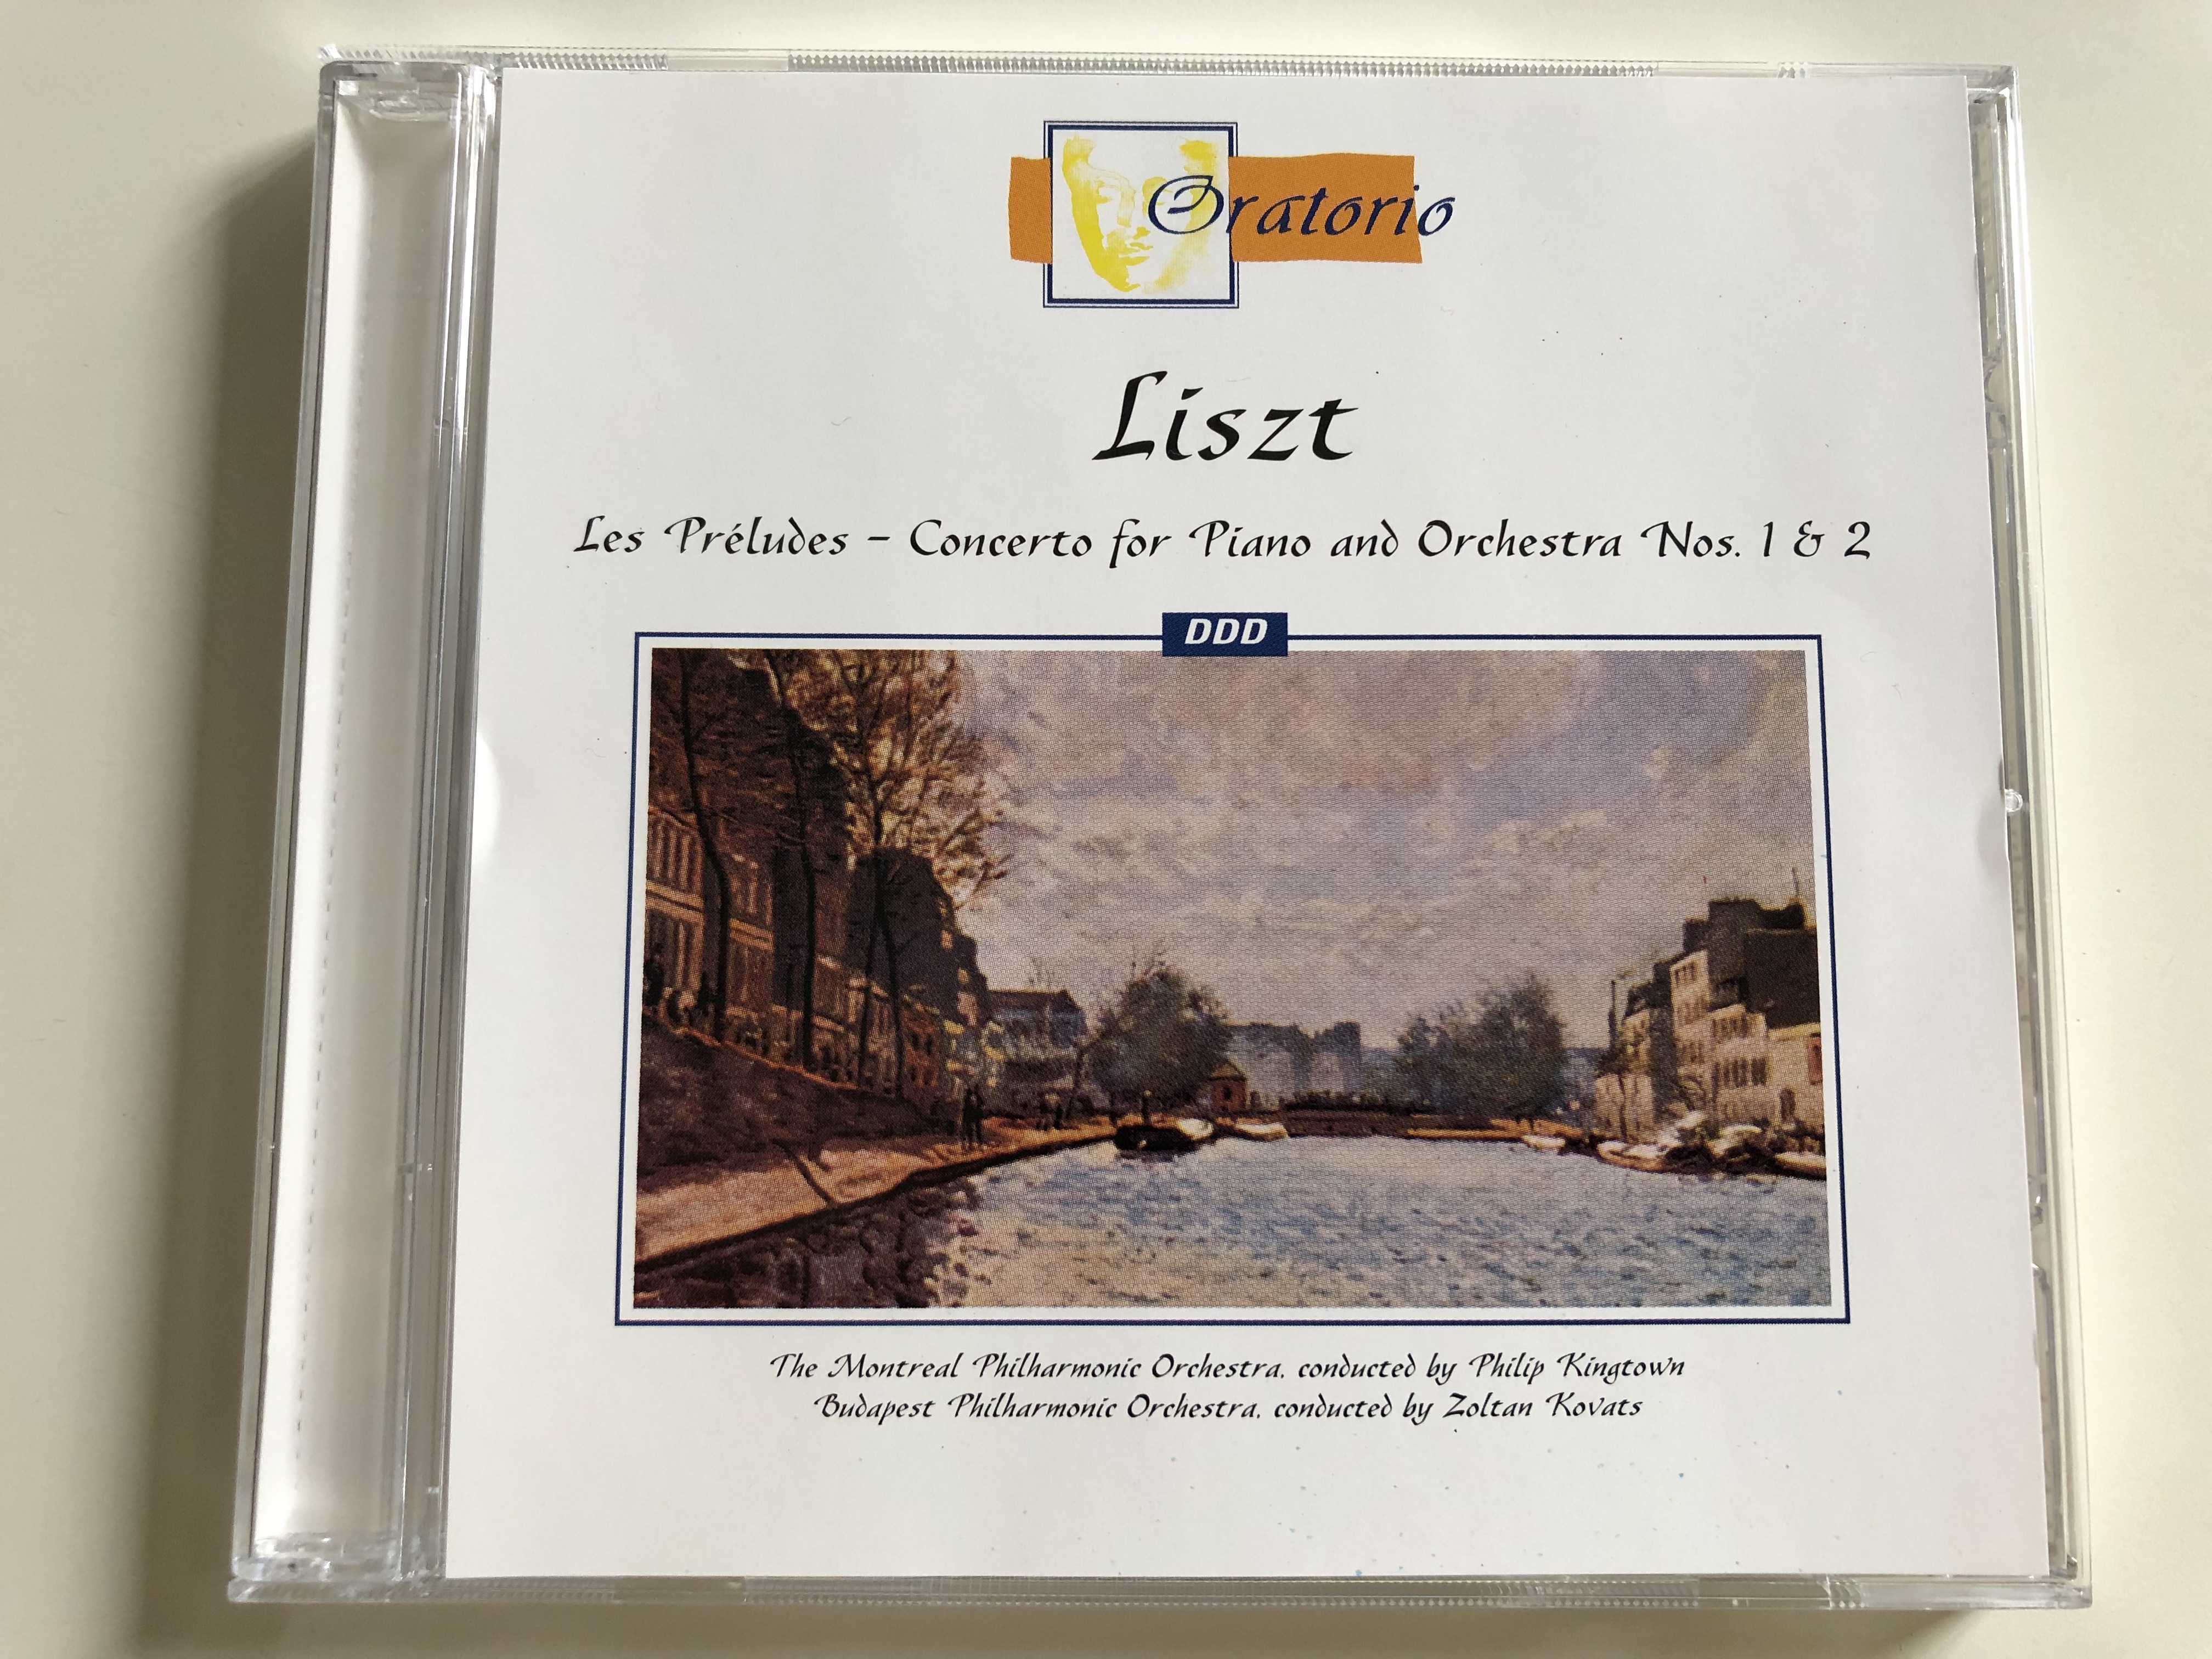 liszt-les-pr-ludes-concerto-for-piano-and-orchestra-nos.-1-2-the-montreal-philharmonic-orchestra-conducted-by-philip-kingtown-budapest-philharmonic-orchestra-conducted-by-zolt-n-kov-ts-audio-cd-1999-1-.jpg